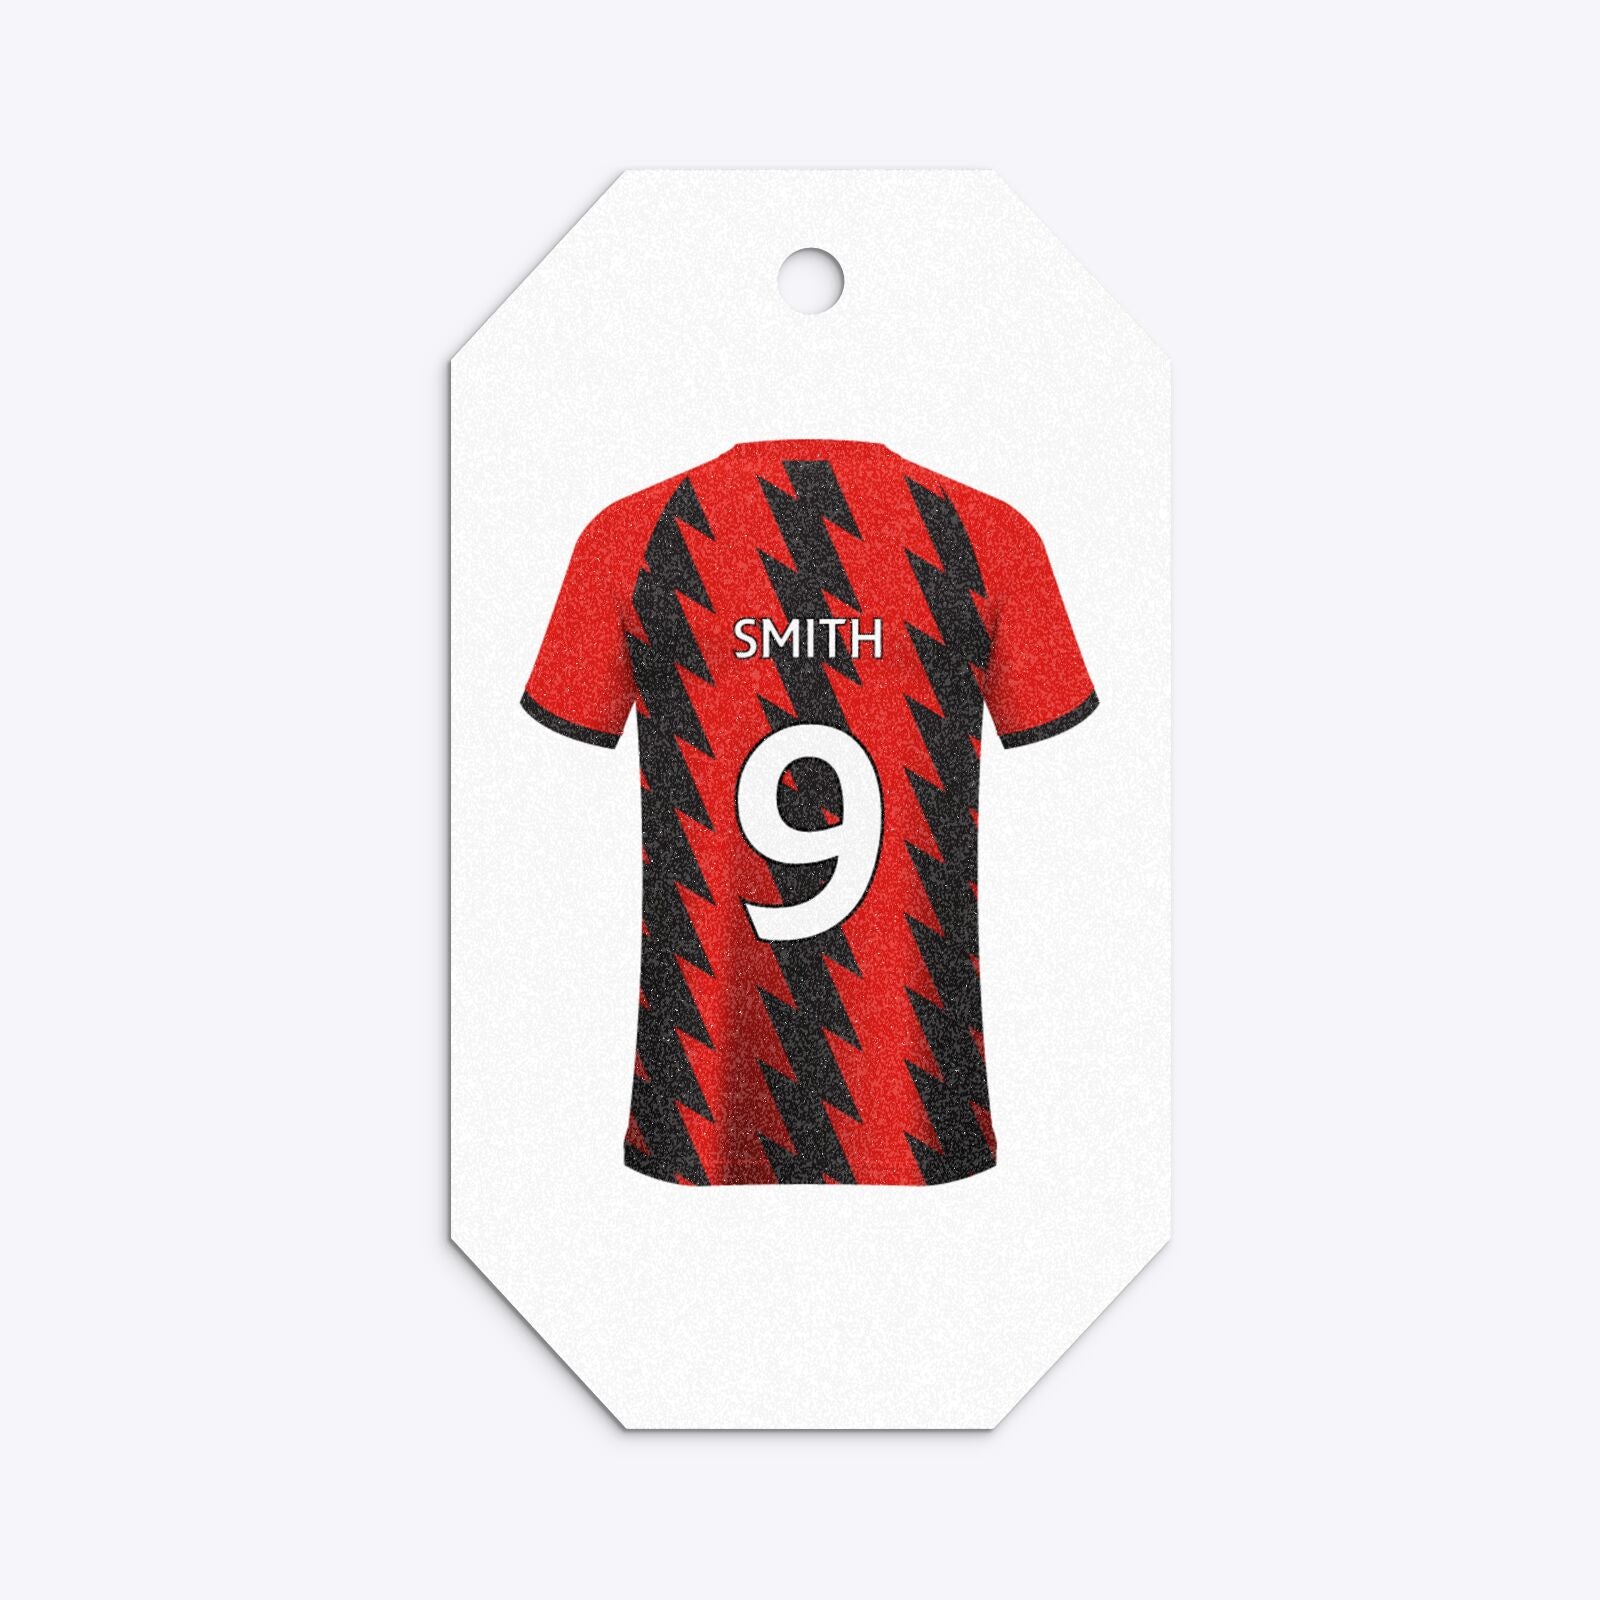 Red and Black Stripes Personalised Football Shirt Gem Glitter Gift Tag